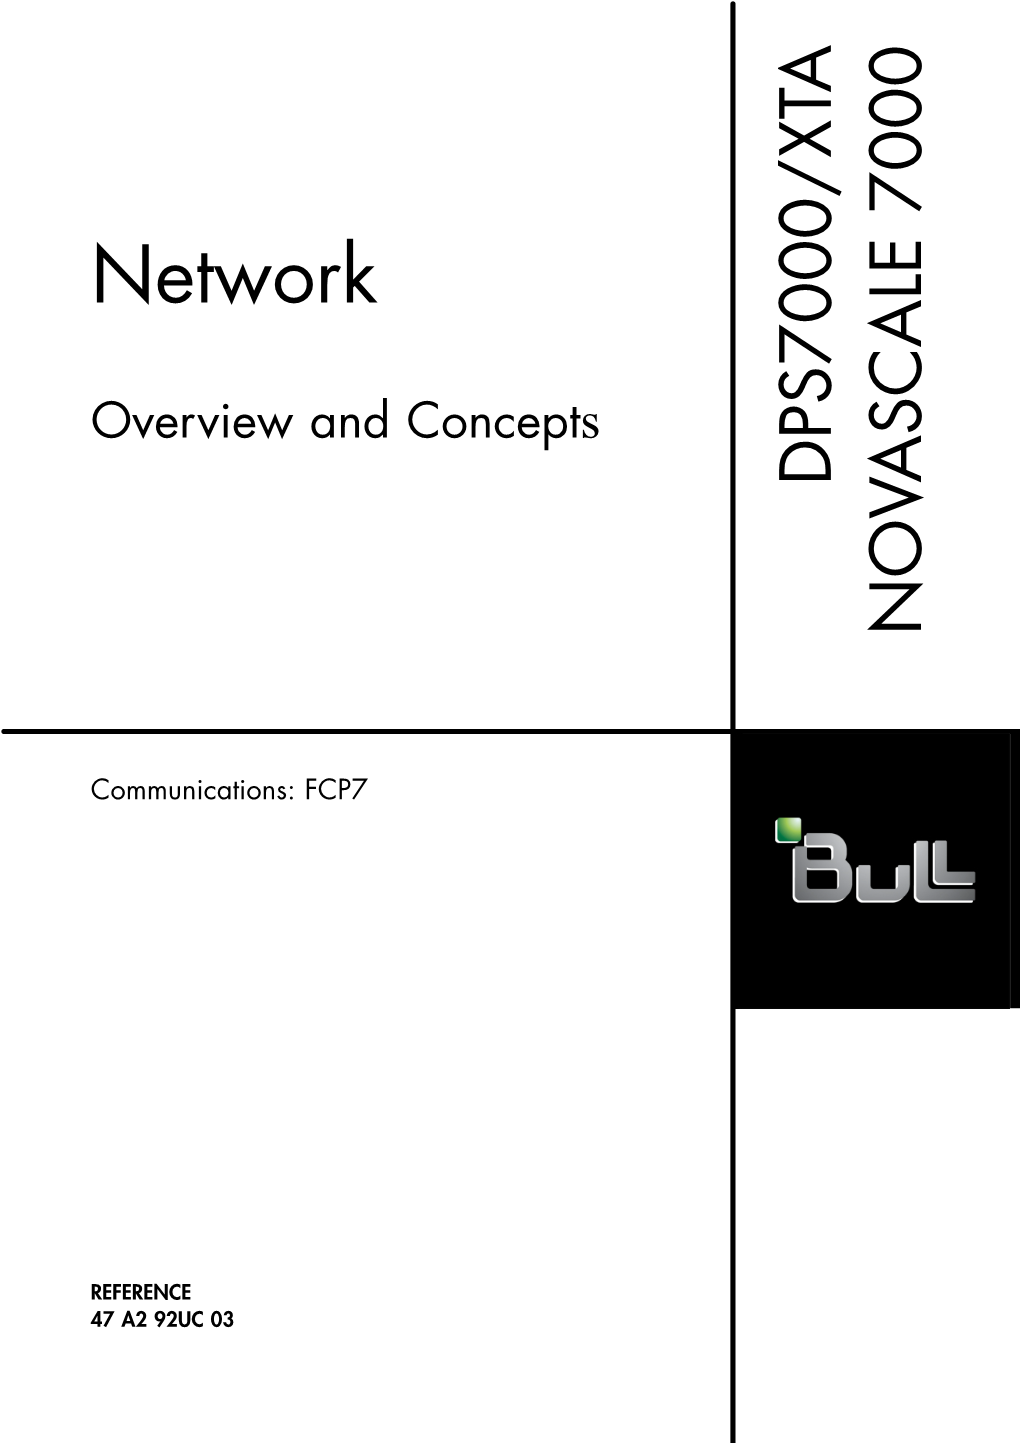 Network Overview and Concepts